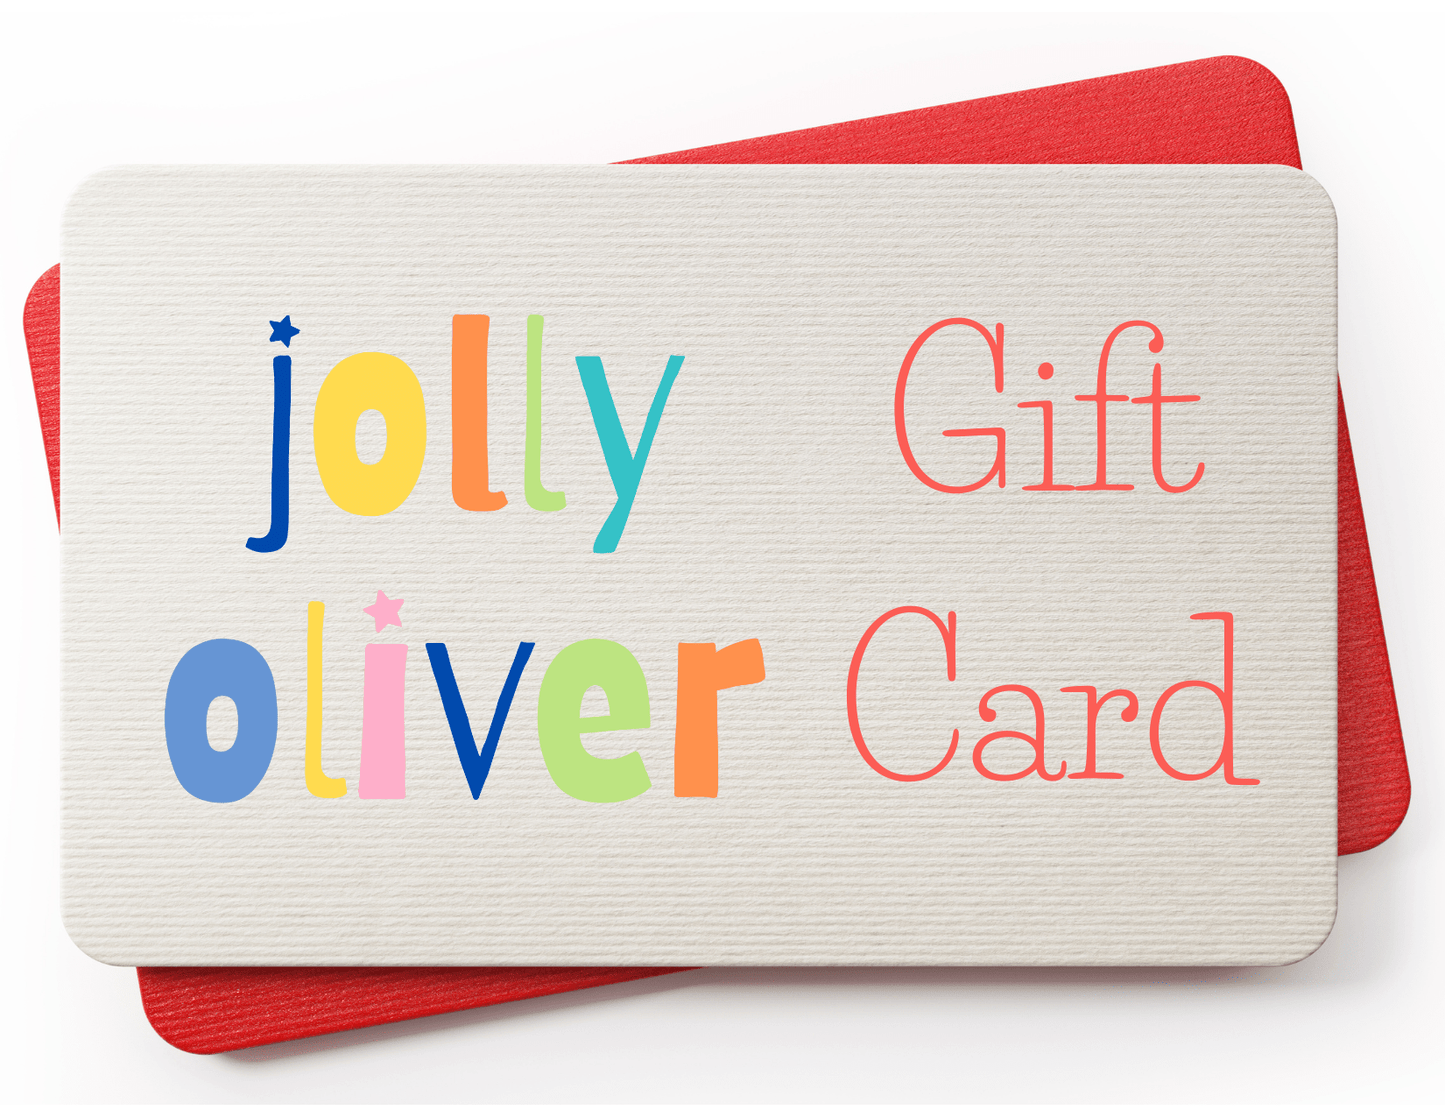 jolly oliver gift card